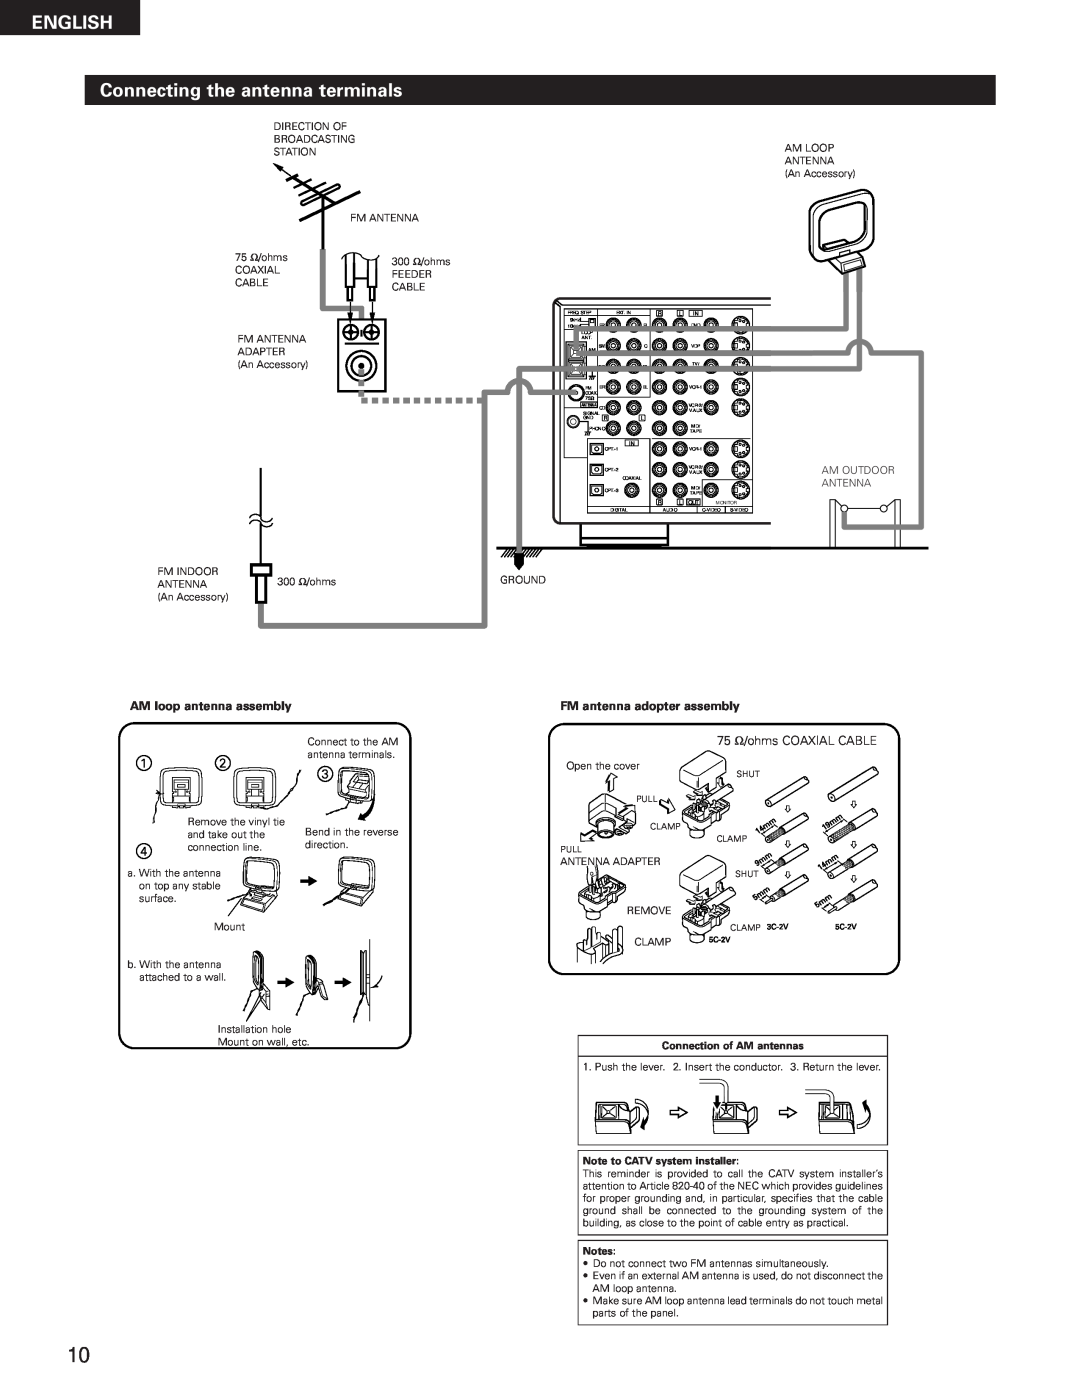 Denon AVR-3300 manual ENGLISH Connecting the antenna terminals, AM loop antenna assembly, FM antenna adopter assembly 